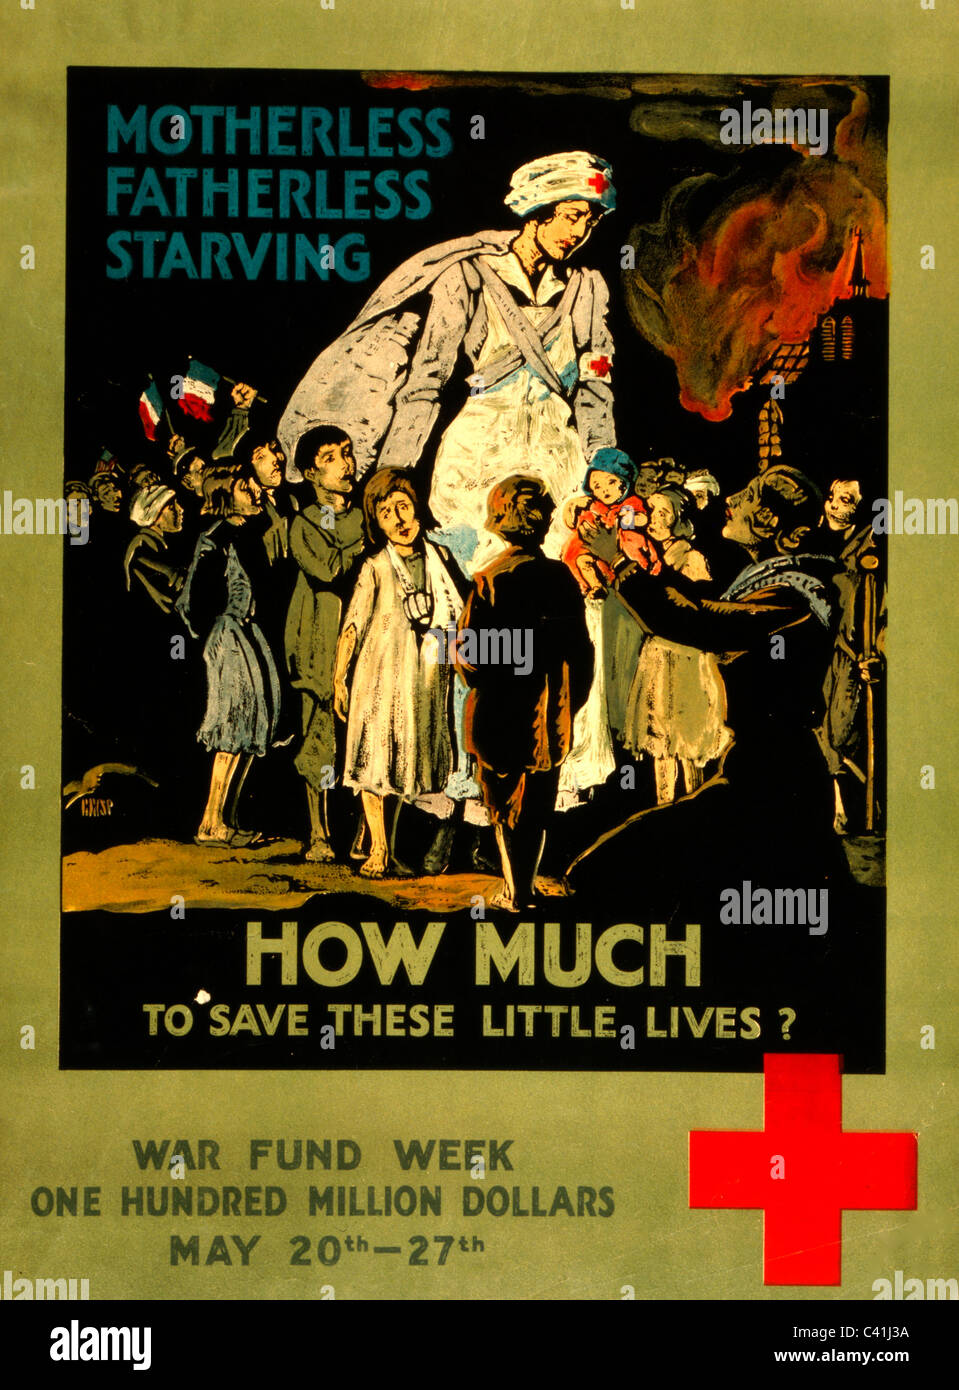 Motherless, fatherless, starving How much to save these little lives? War Fund week One hundred million dollars May 20th-27th Stock Photo